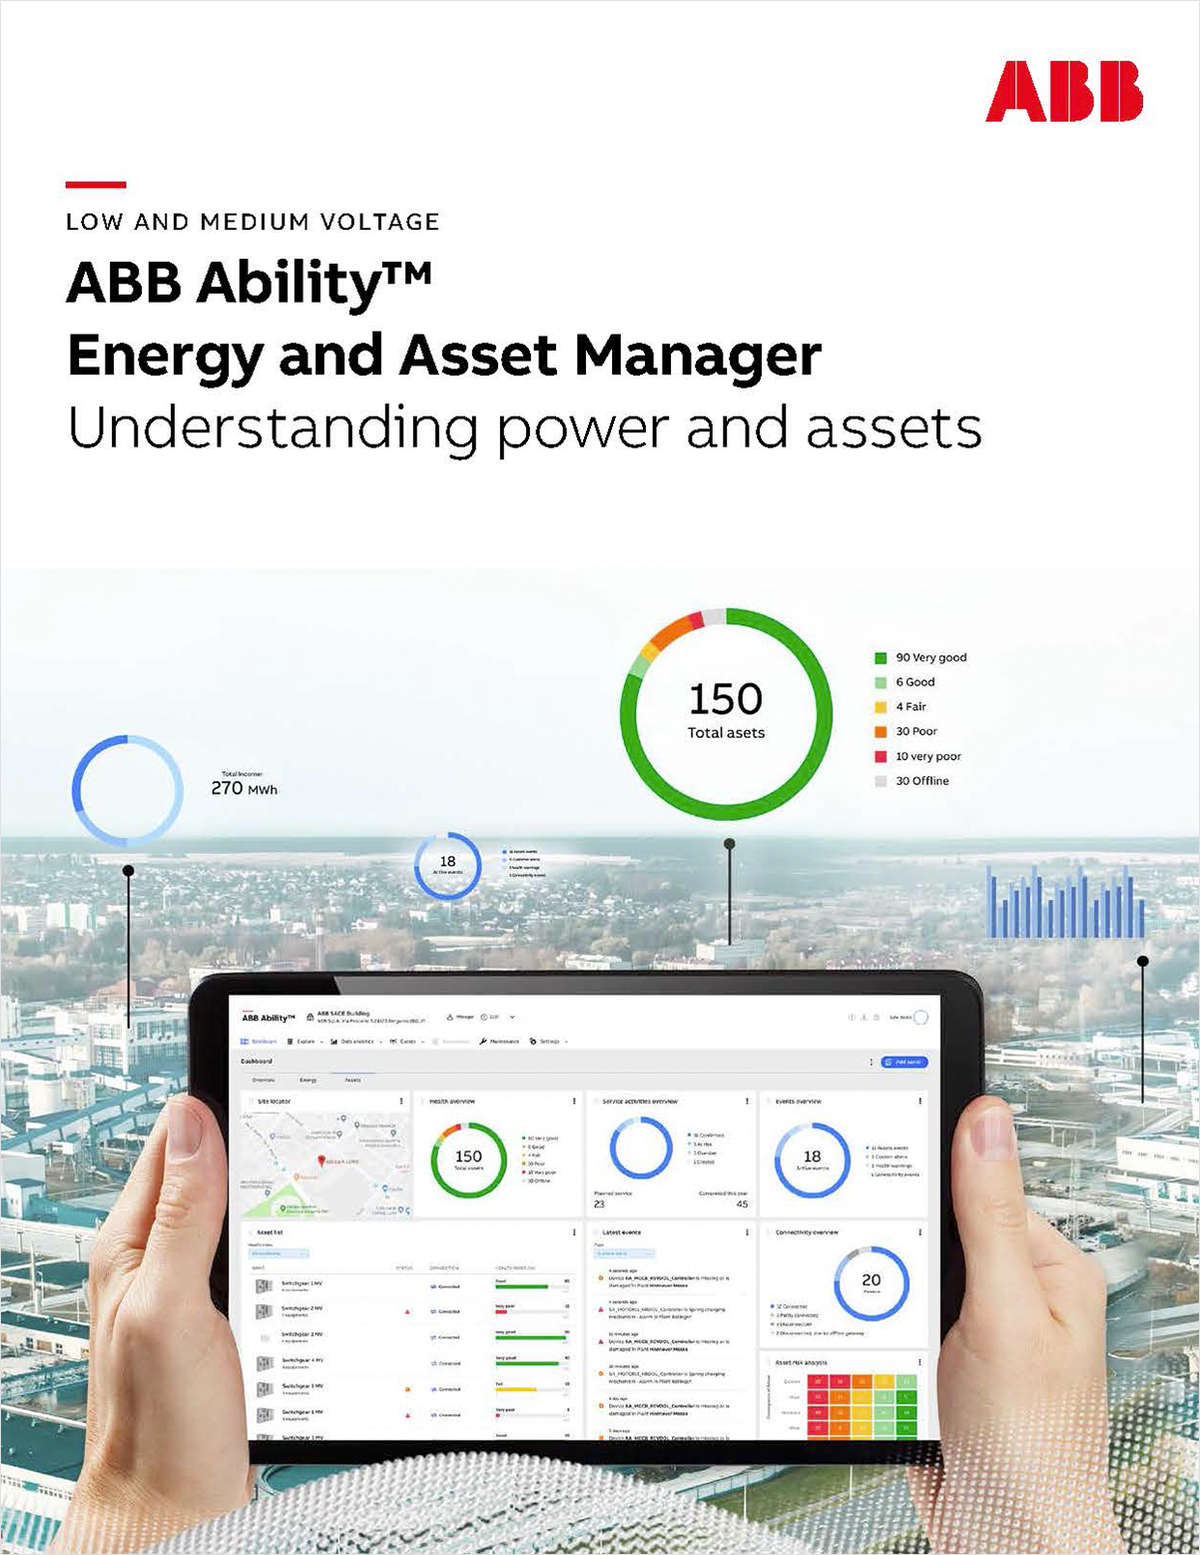 ABB Ability Energy Manager Product Brochure - IE